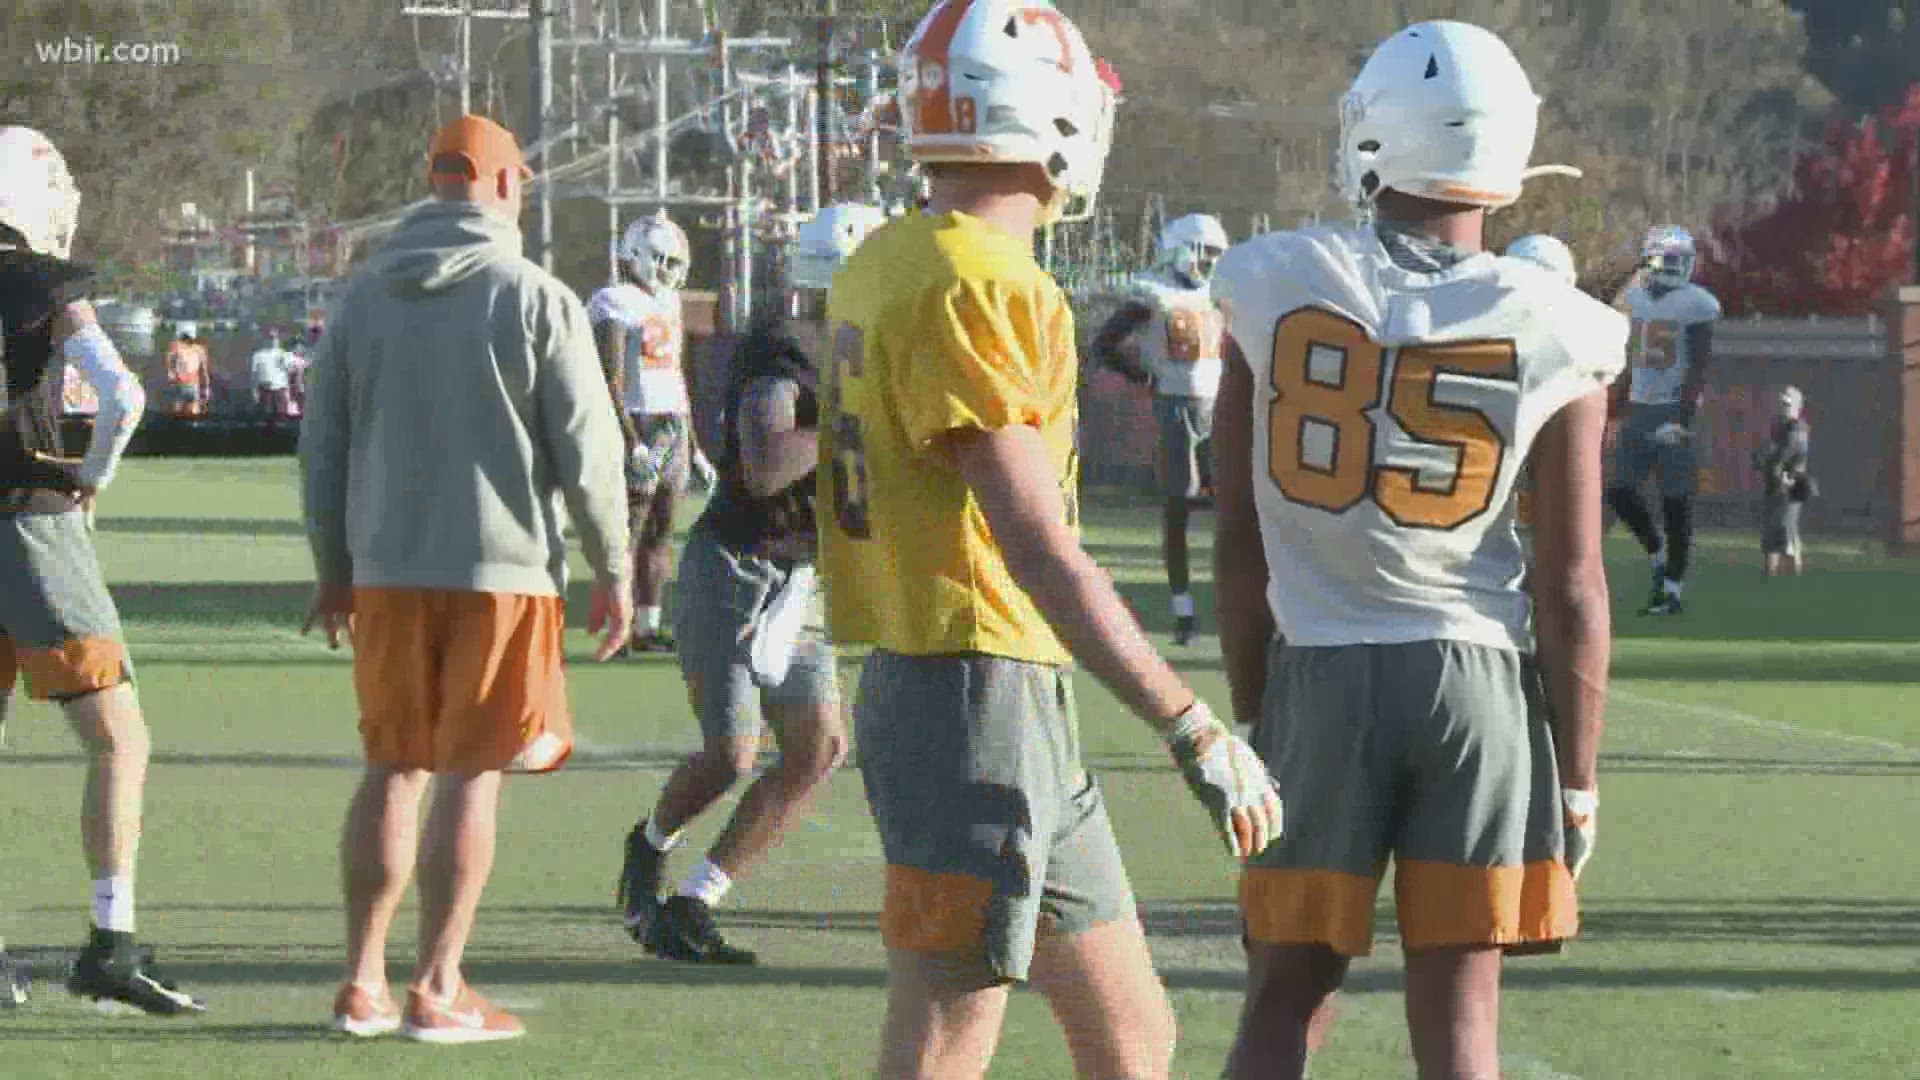 Student-athletes at UT are back on campus for offseason workouts.